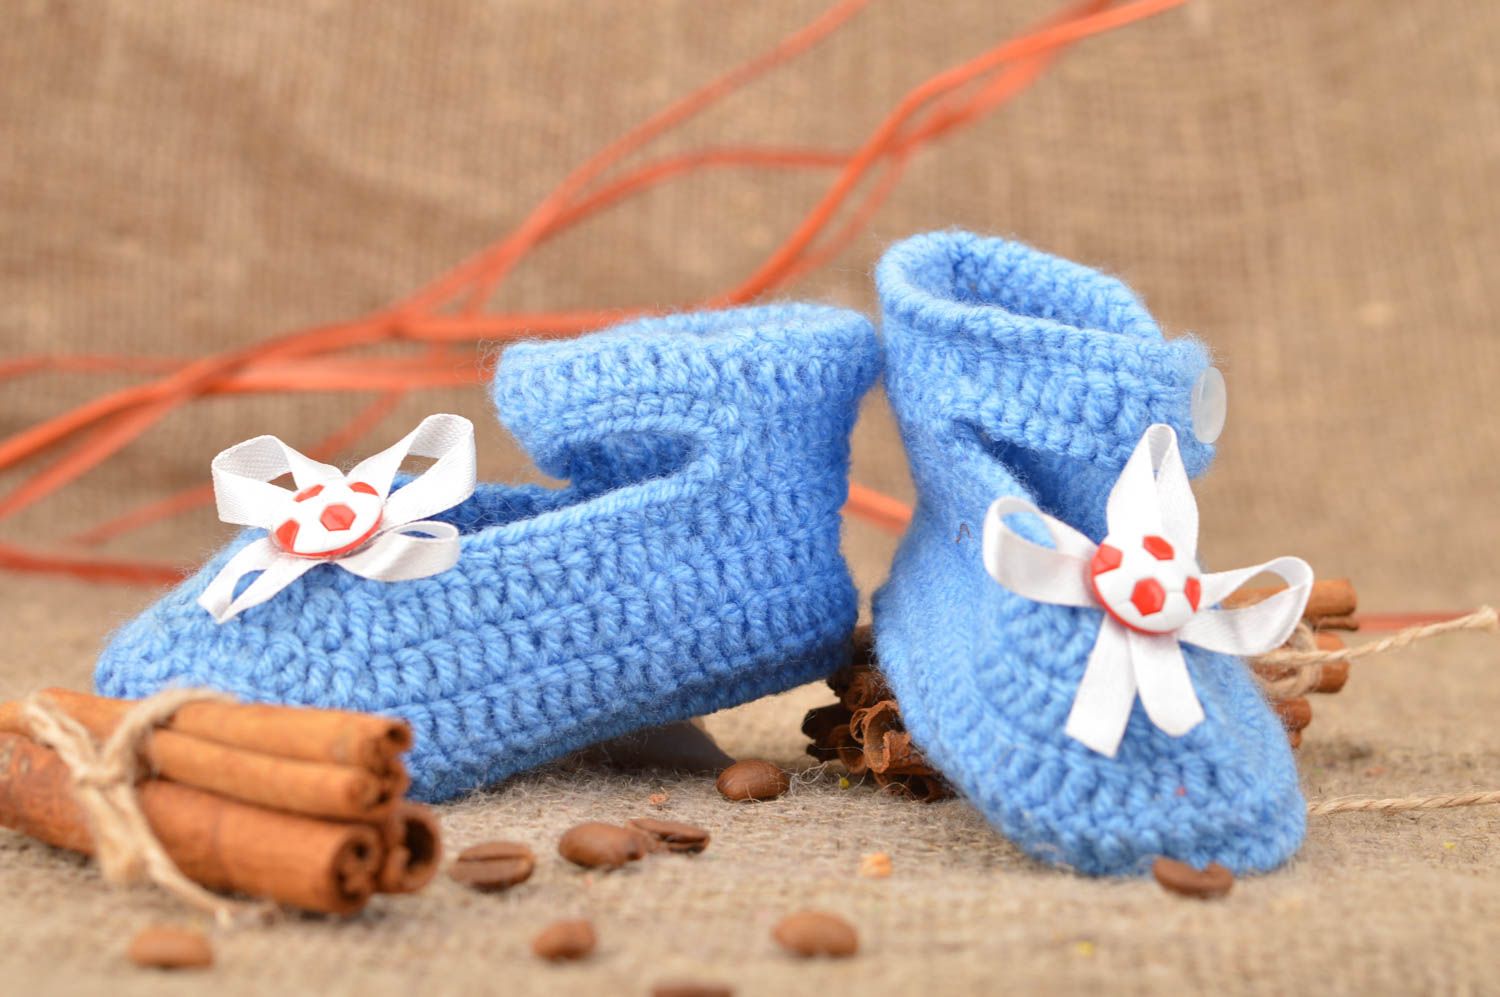 Booties for babies made of wool and cotton yarns handmade crocheted accessory photo 1